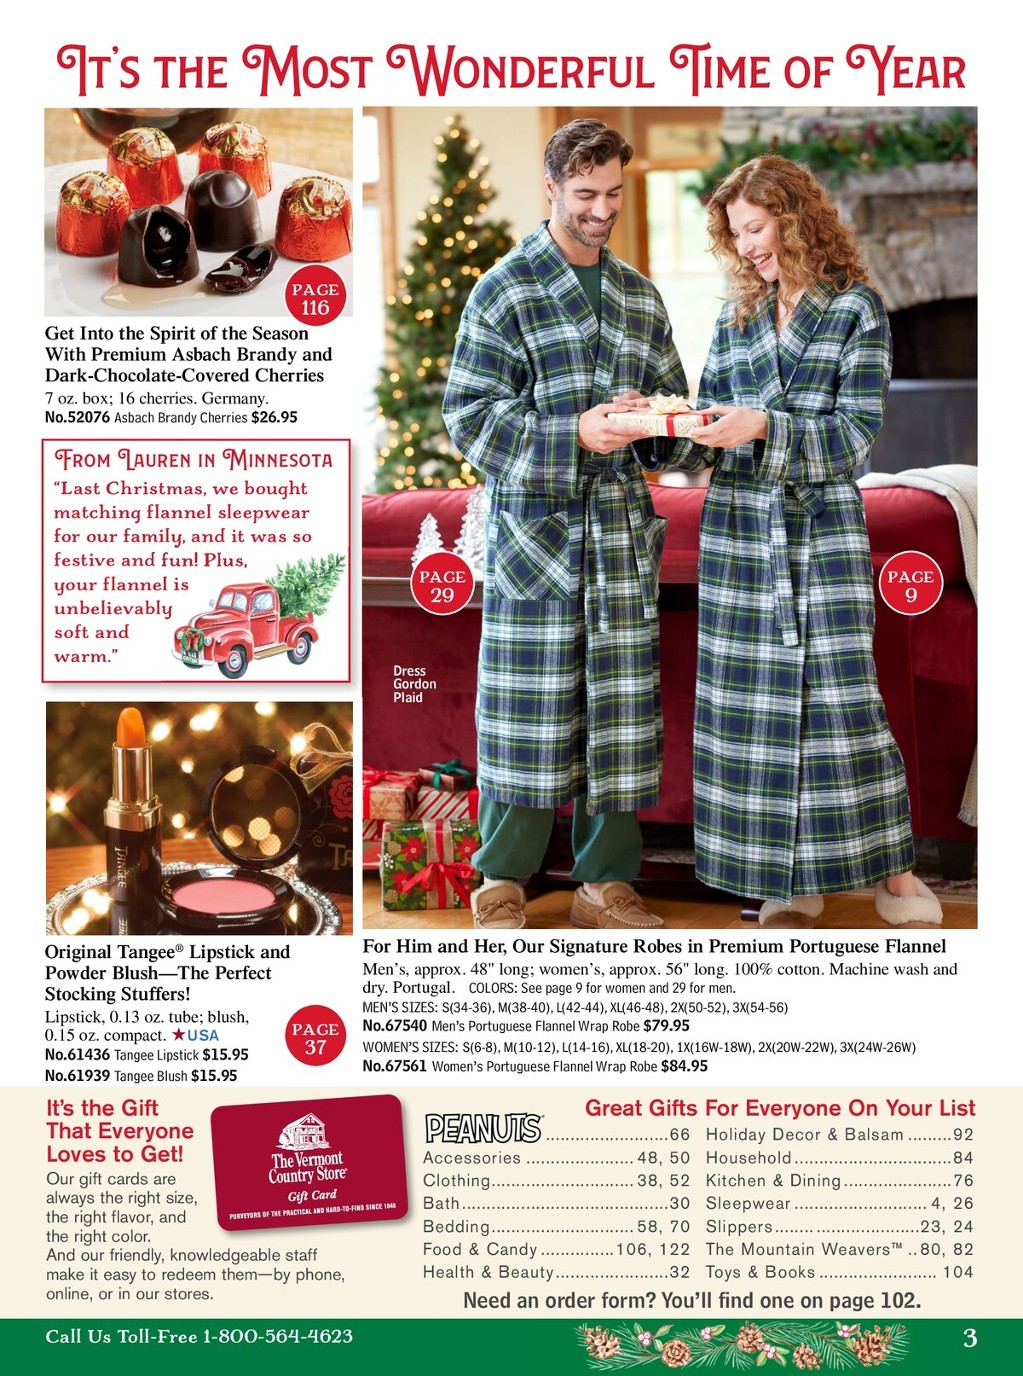 The Vermont Country Store Catalog Online